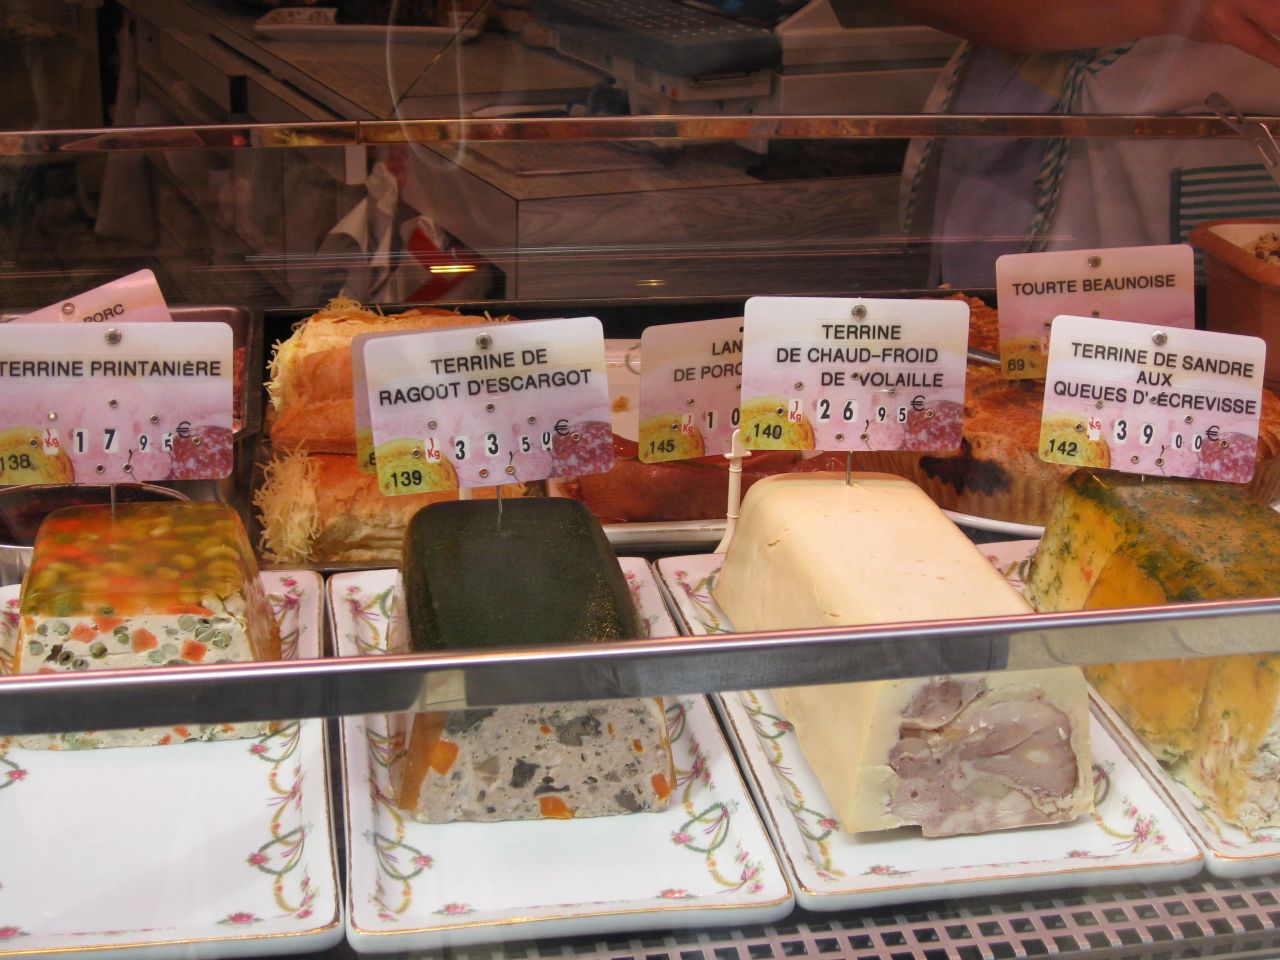 several different types of cheeses on display in glass